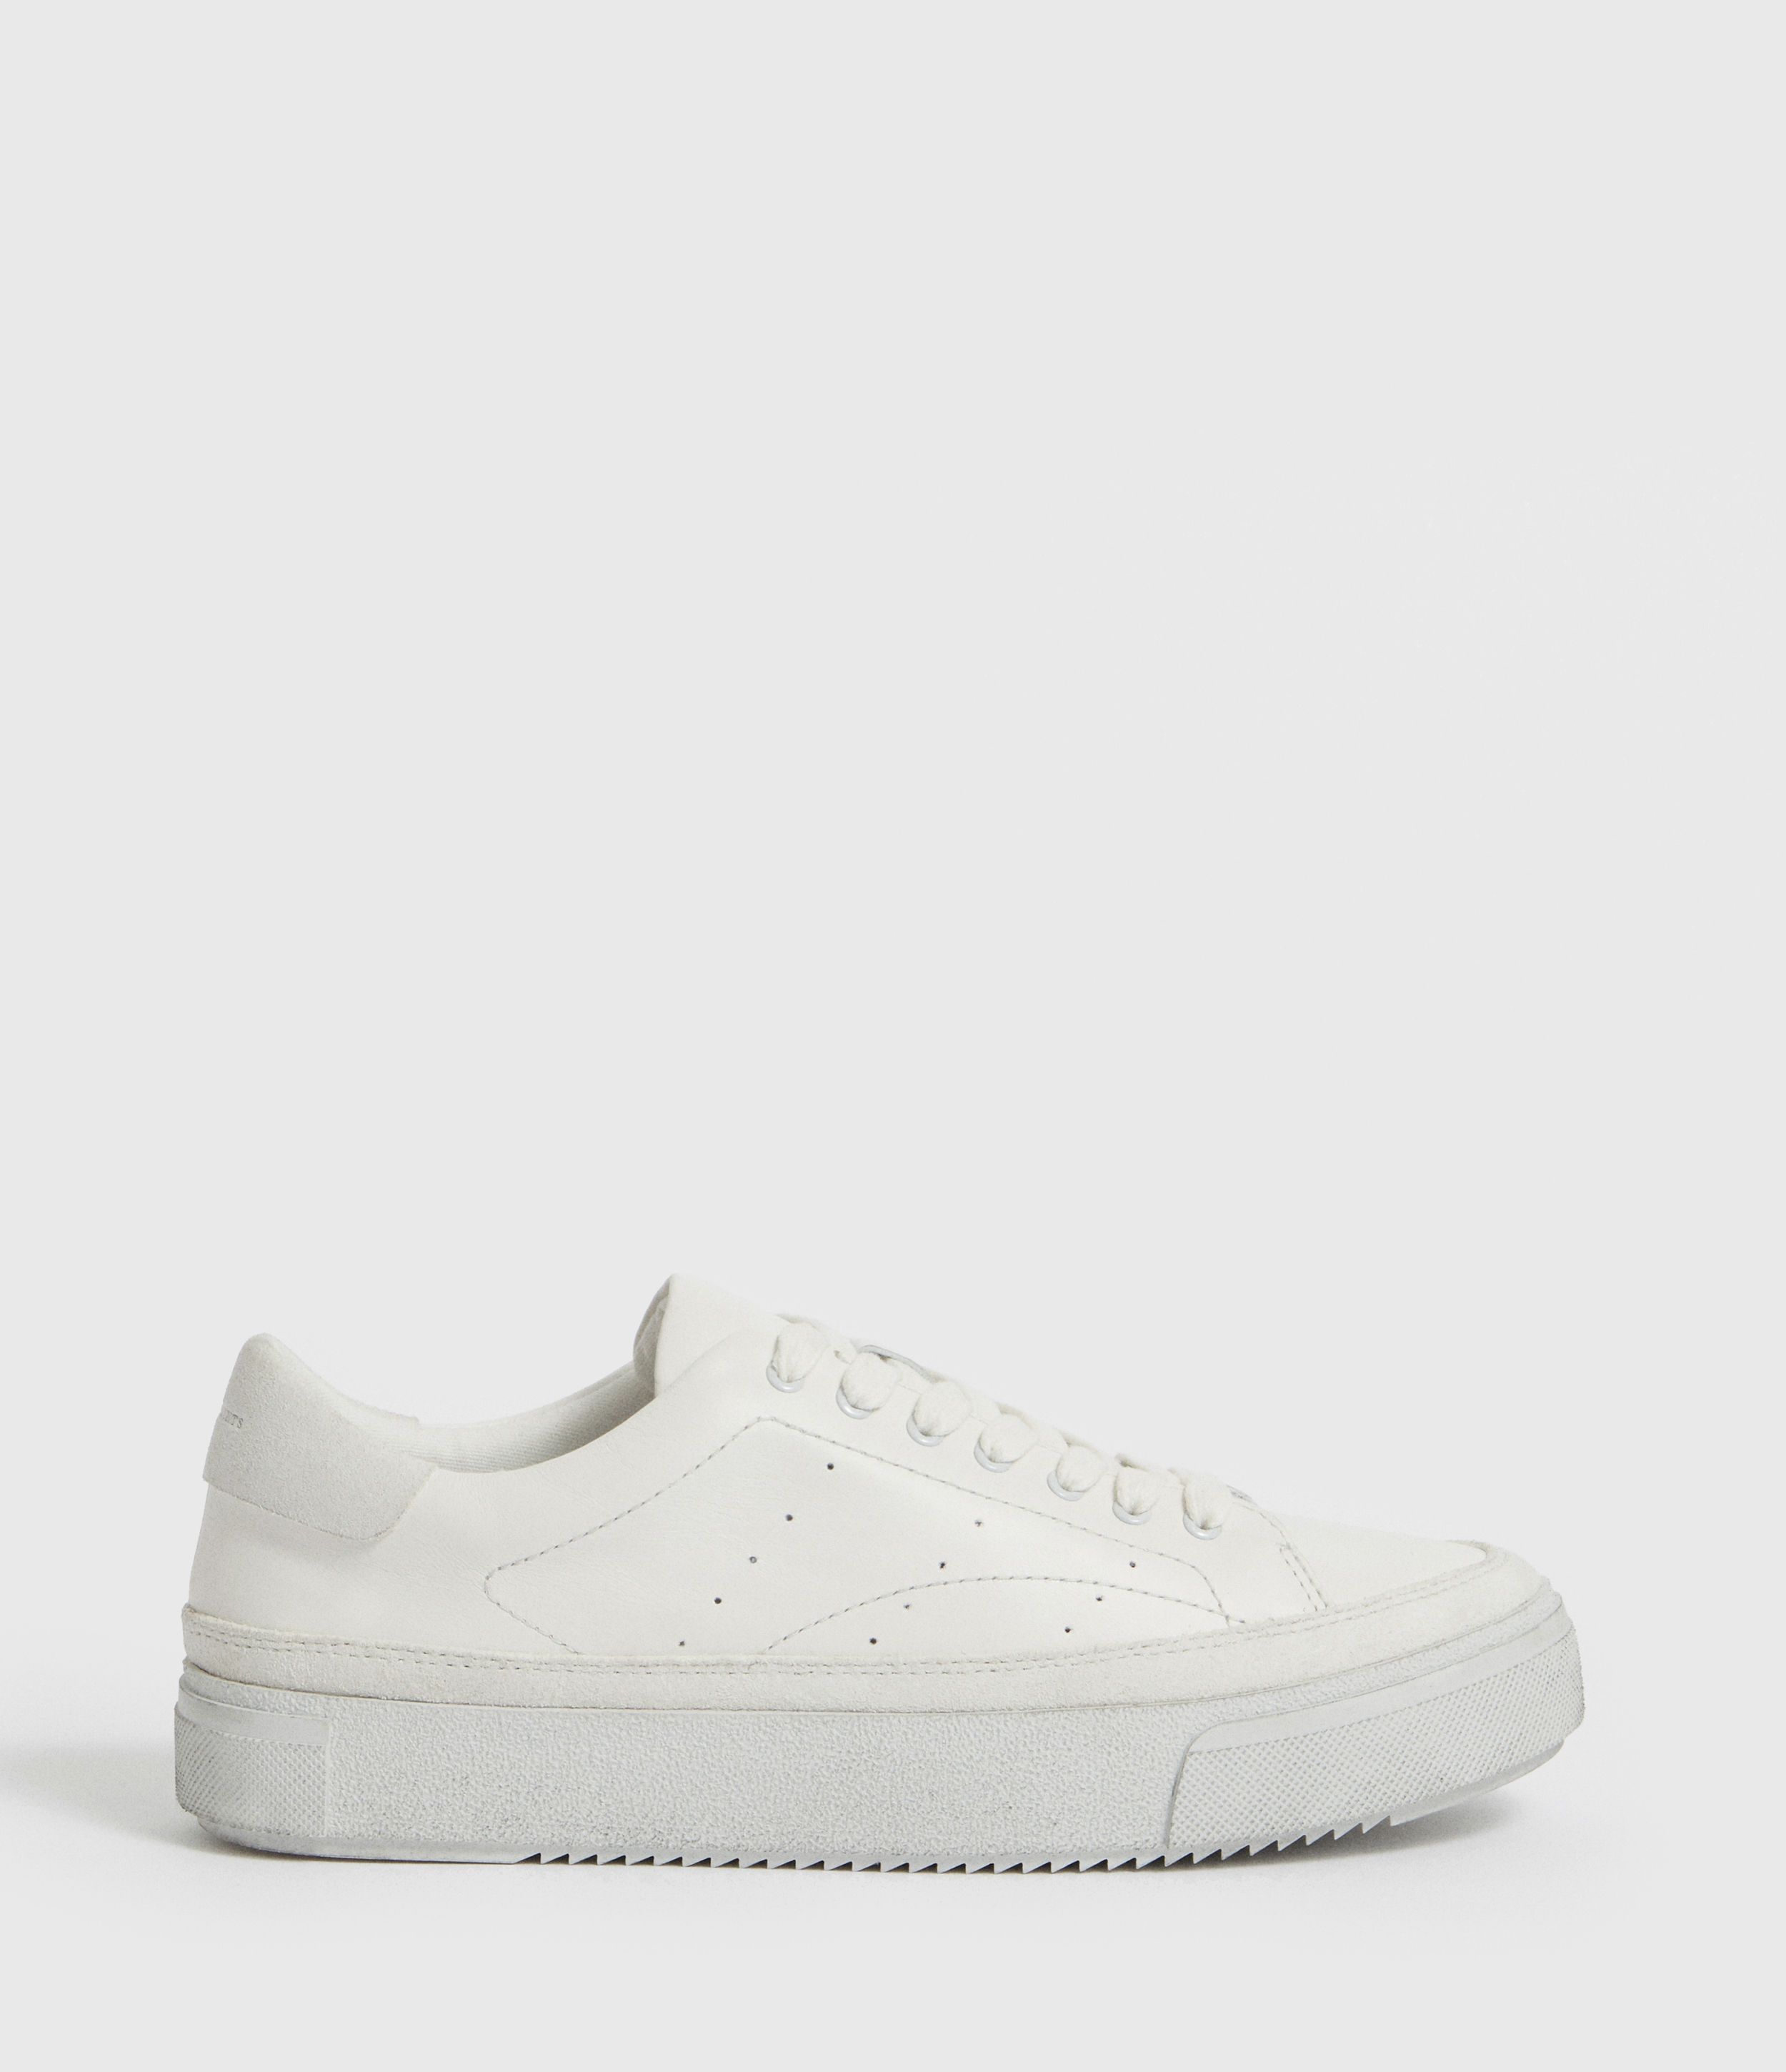 white trainers with gold trim